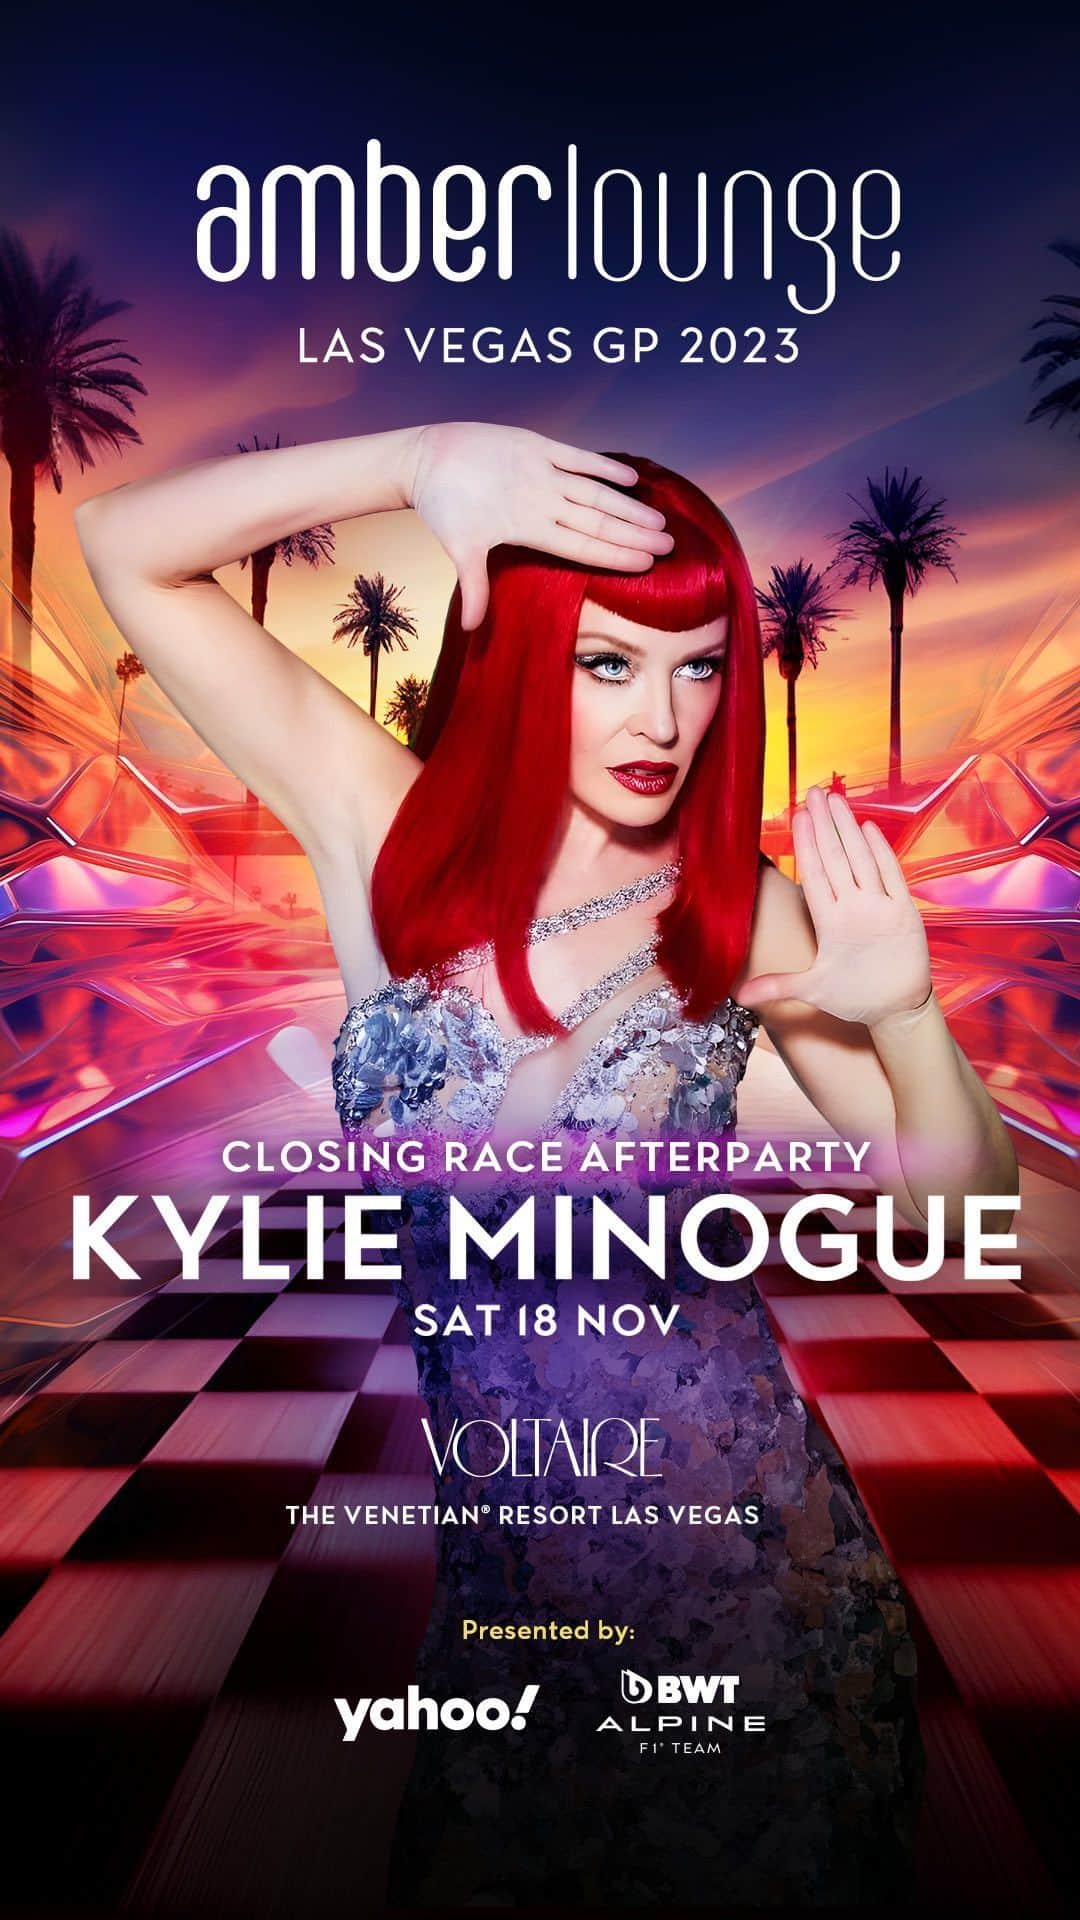 The Venetian Las Vegasのインスタグラム：「Celebrate the first-ever US Grand Prix night race with opulence, performances, and luxe hospitality. @amberloungeltd , the exclusive afterparty, debuts TONIGHT at @voltairelv after the Las Vegas Grand Prix 2023, join us for a night with @kylieminogue and @djjellybeanbenitez    Elevate your Grand Prix experience with Amber Lounge!  #AmberLounge #LasVegasGrandPrix #Formula1 #KylieMinogue #JellybeanBenitez #TheVenetianLasVegas #RaceAfterparty #NightRaceCelebration」